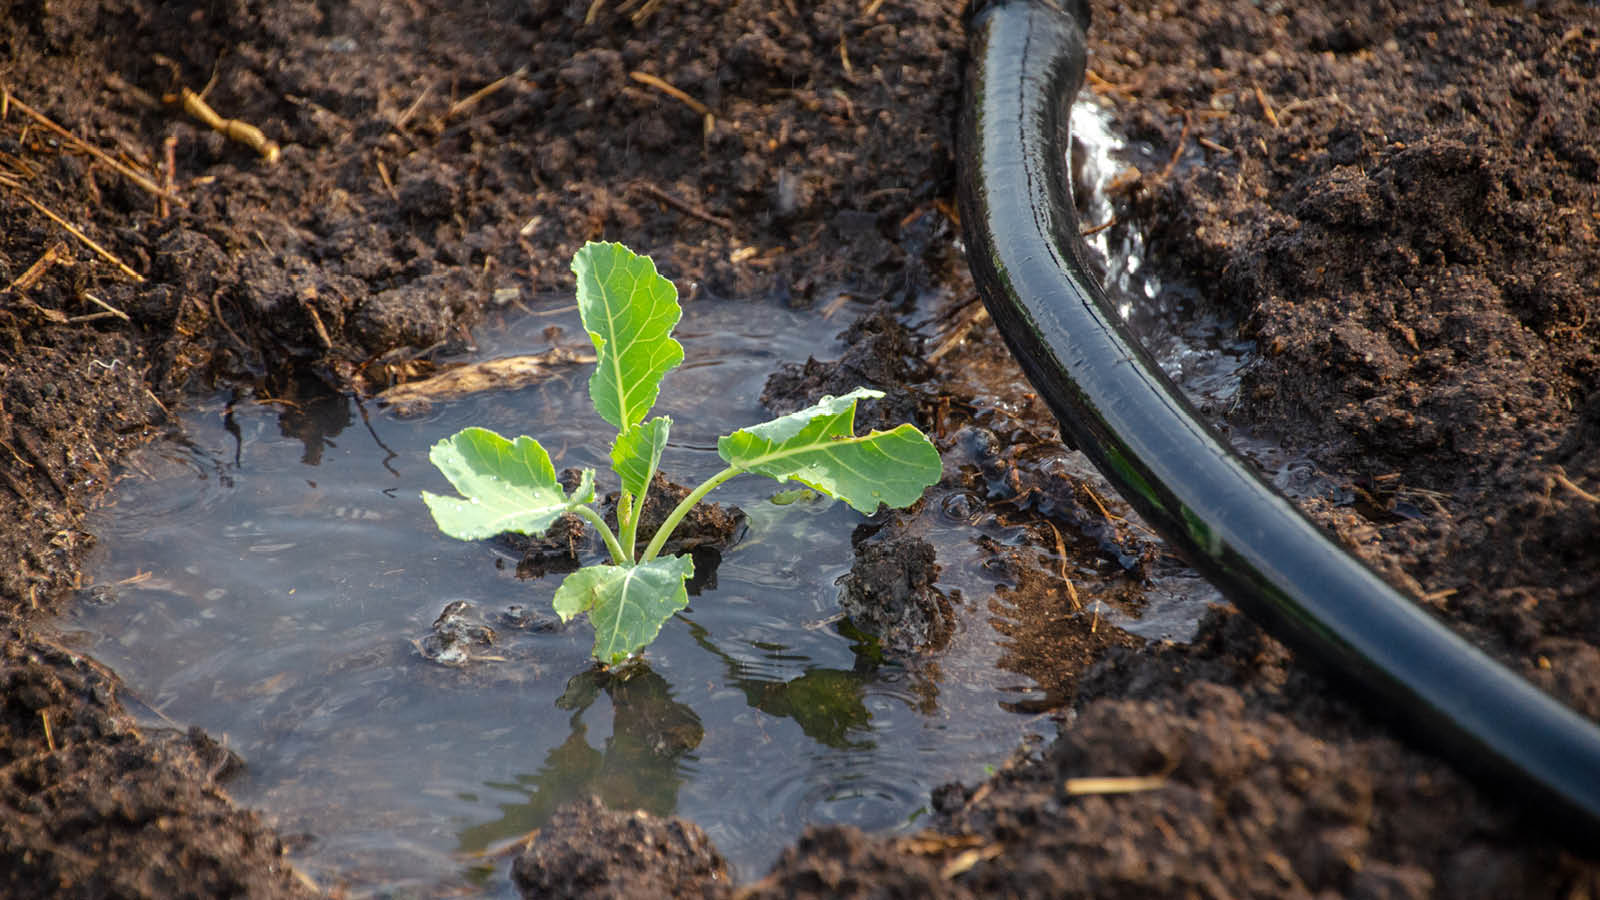 A kale plant in a puddle of water next to a hose